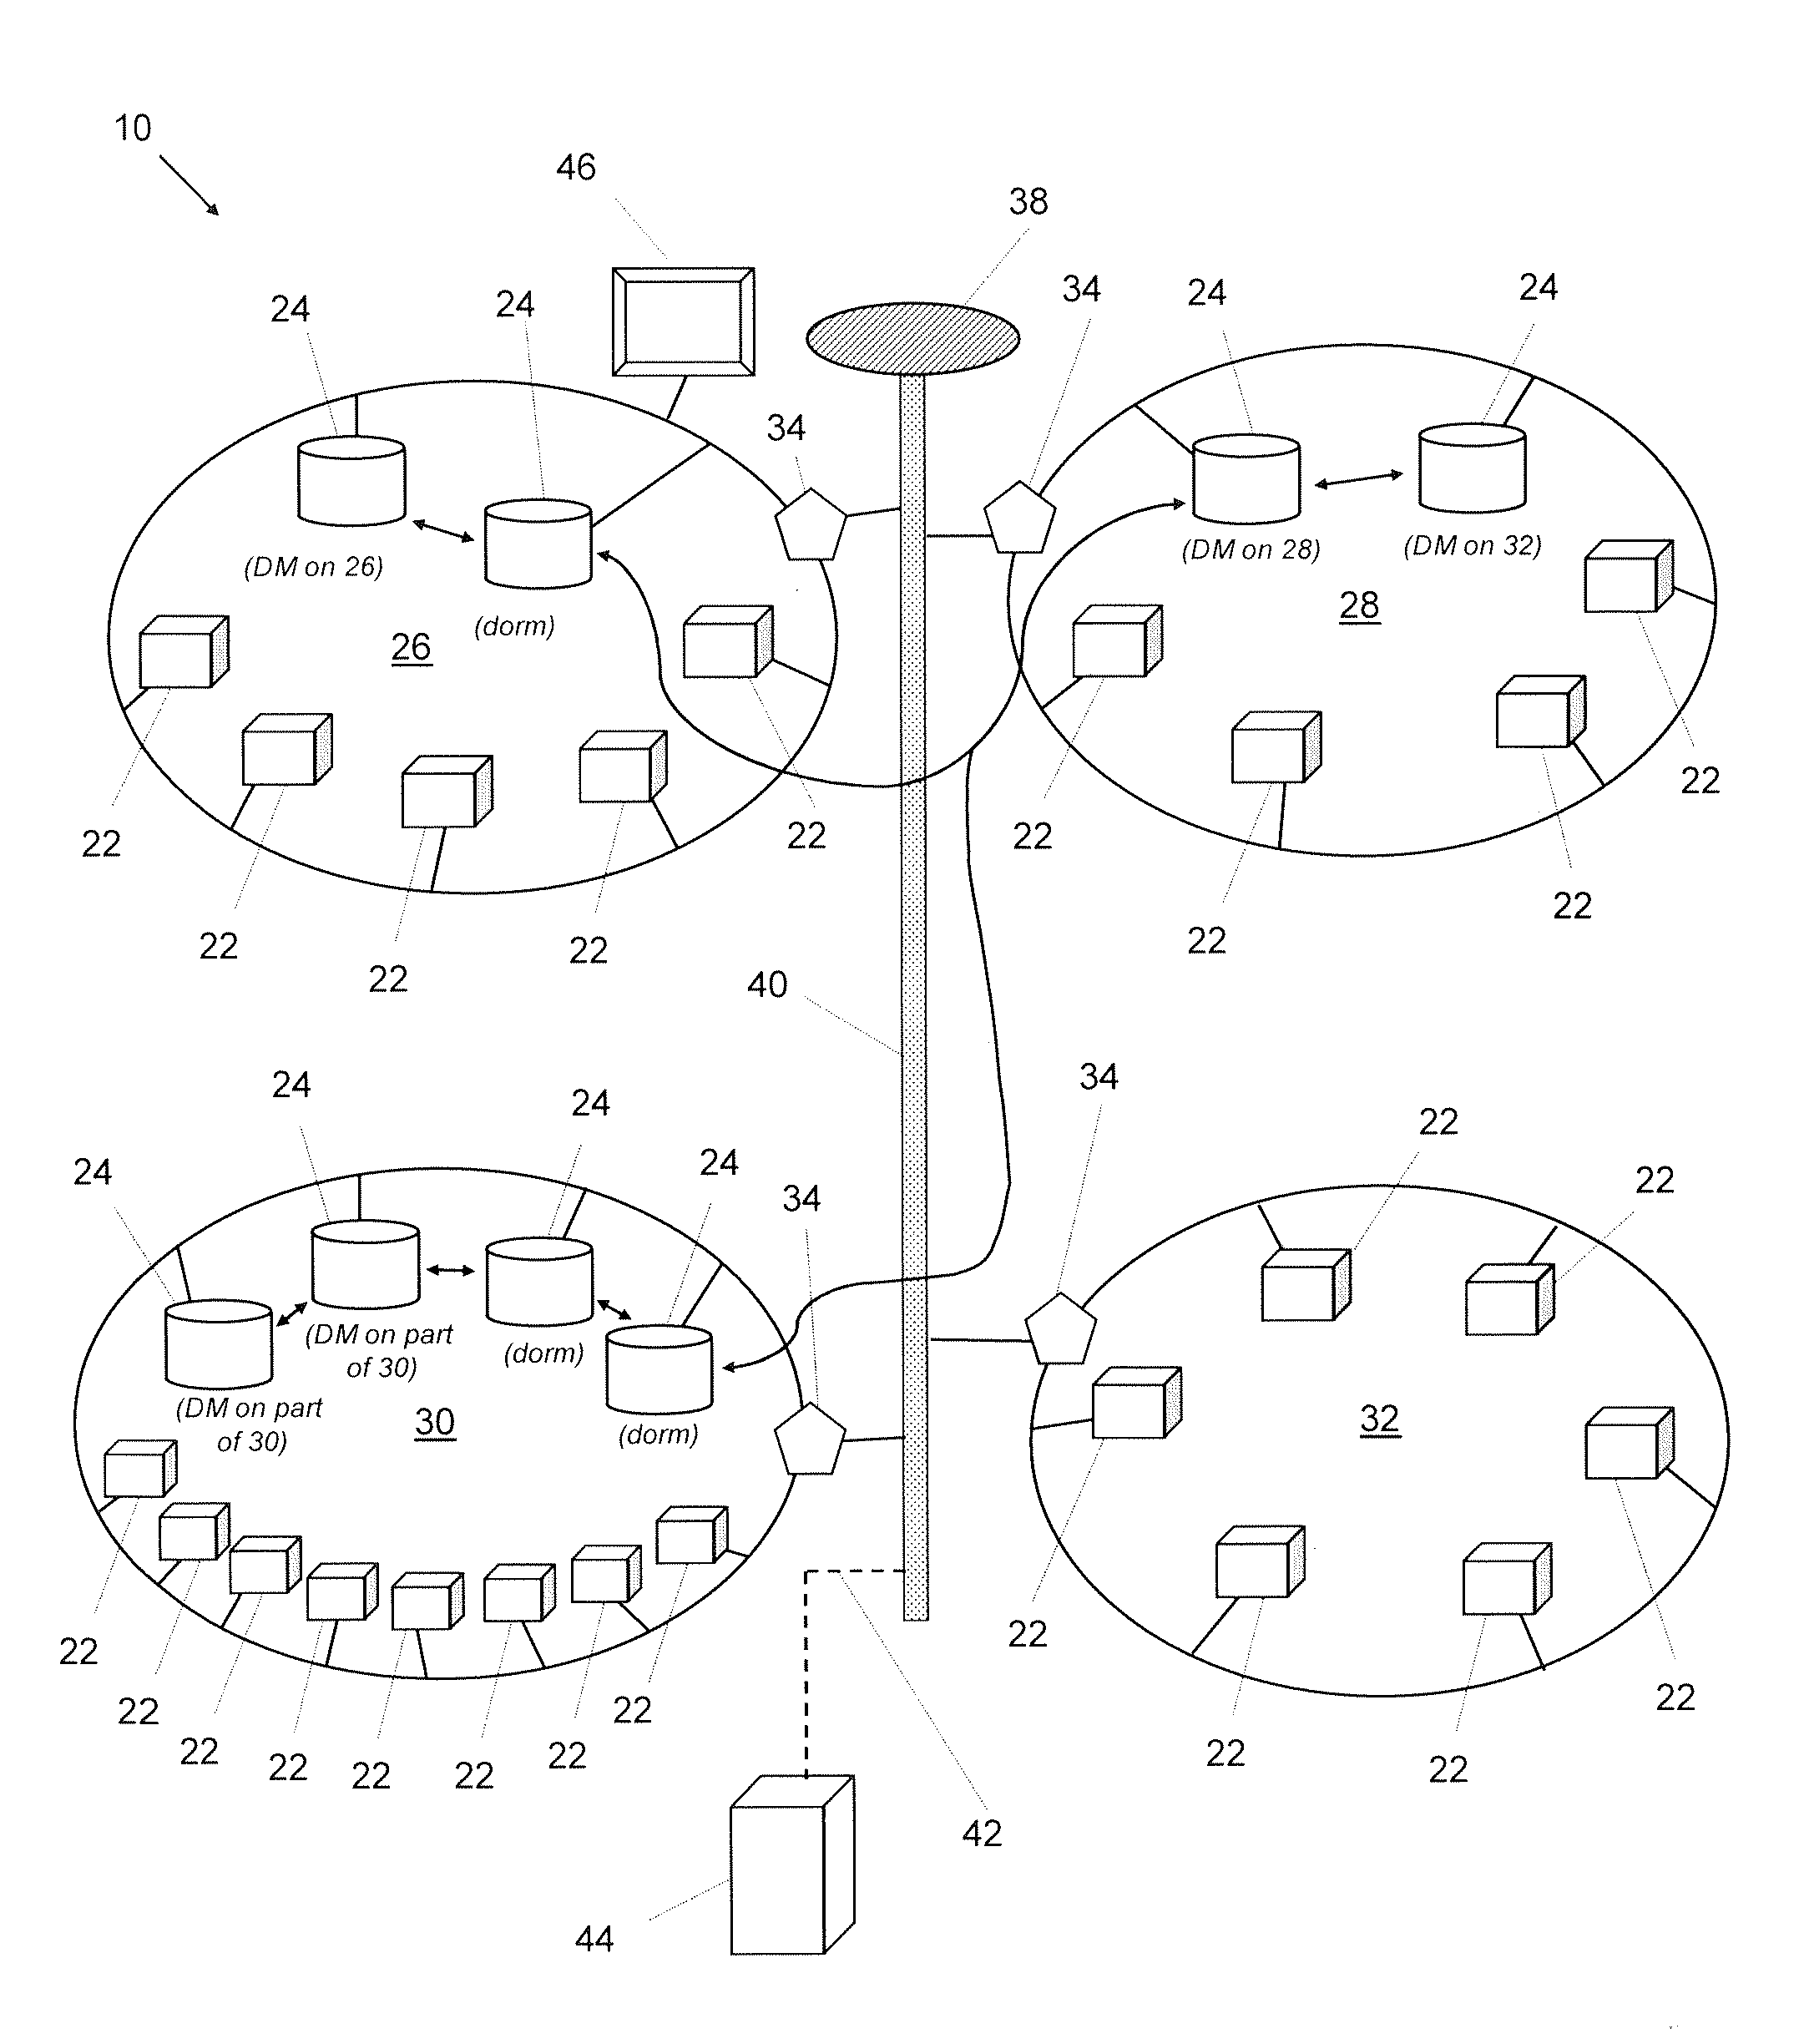 System and method for monitoring a plurality of network devices